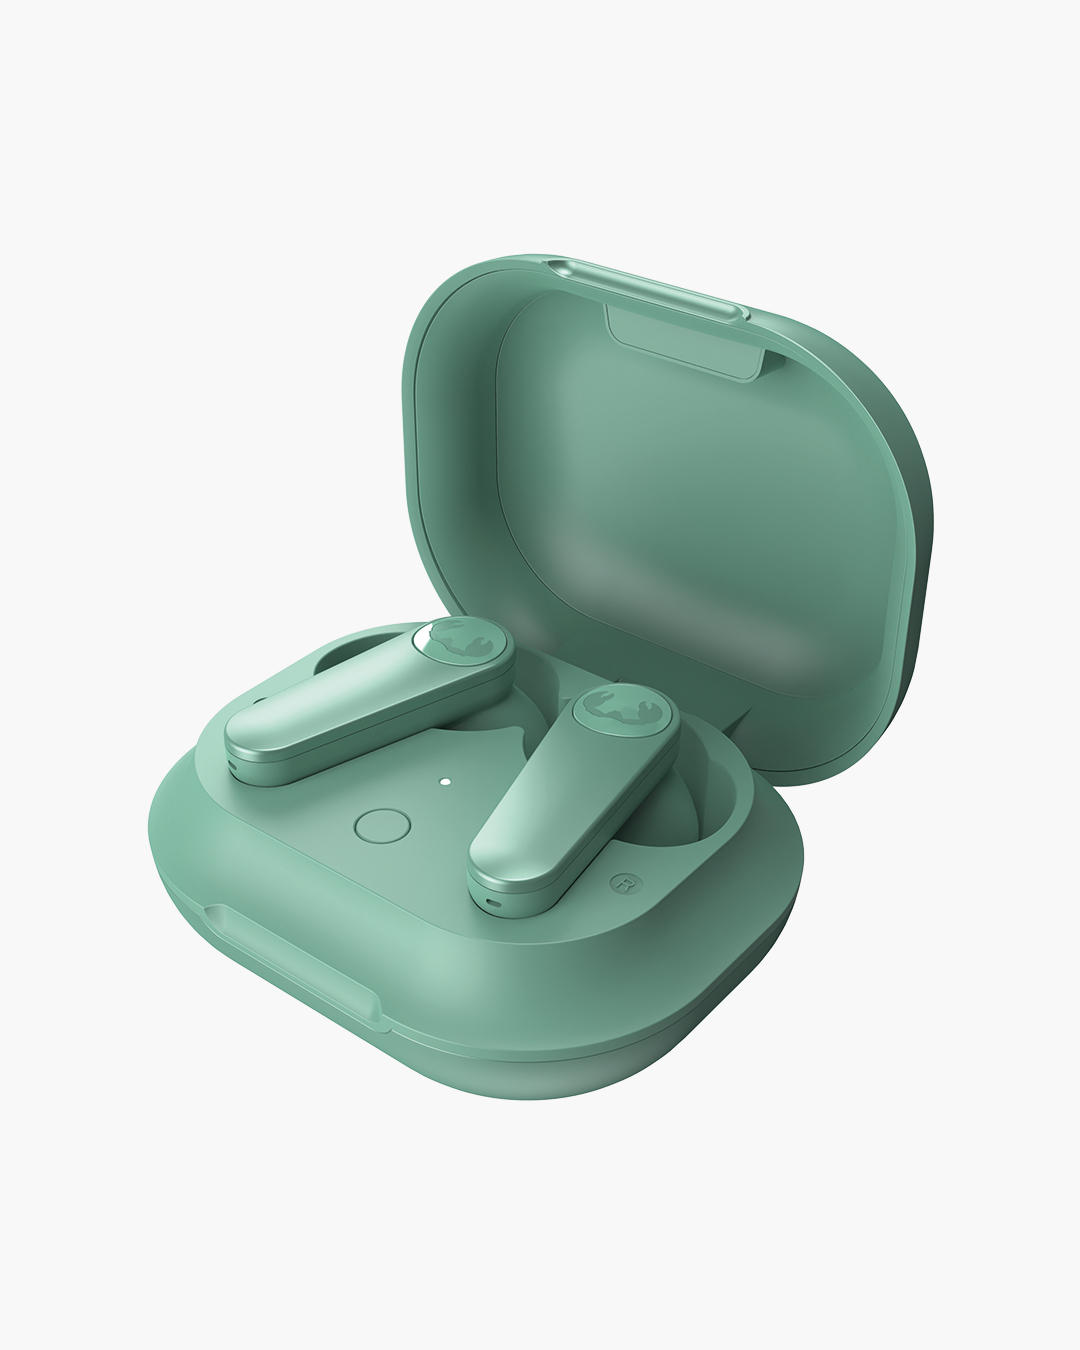 Fresh 'n Rebel - Twins ANC - True Wireless In-ear headphones with active noise cancelling - Misty Mint